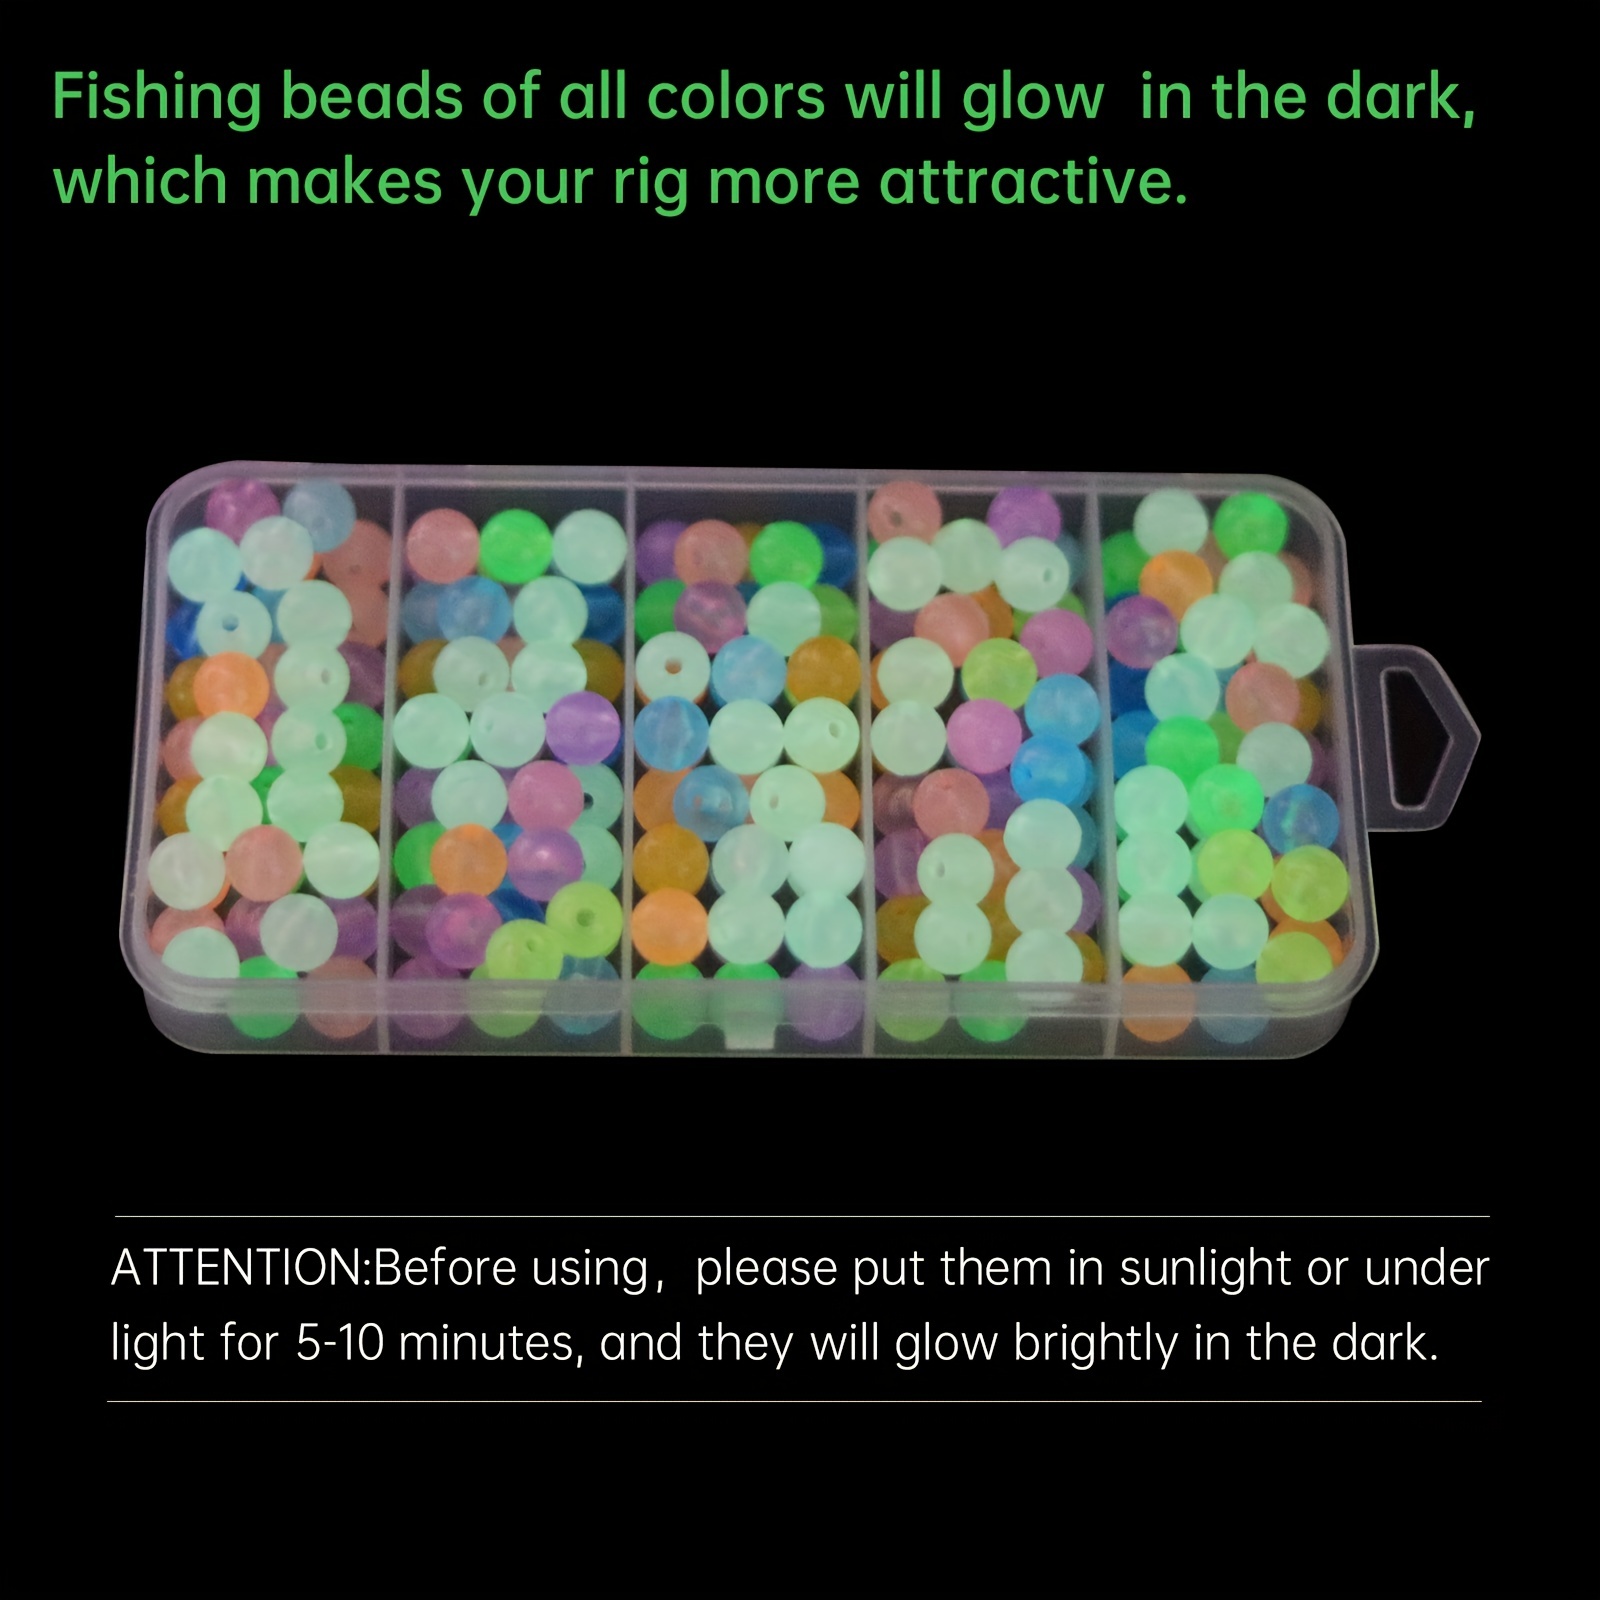 200pcs/box Fishing Beads 6mm Glow in Dark Plastic Green Fishing Line Bead  Rubber Soft Beads Freshwater Saltwater for Fishing Rig - AliExpress